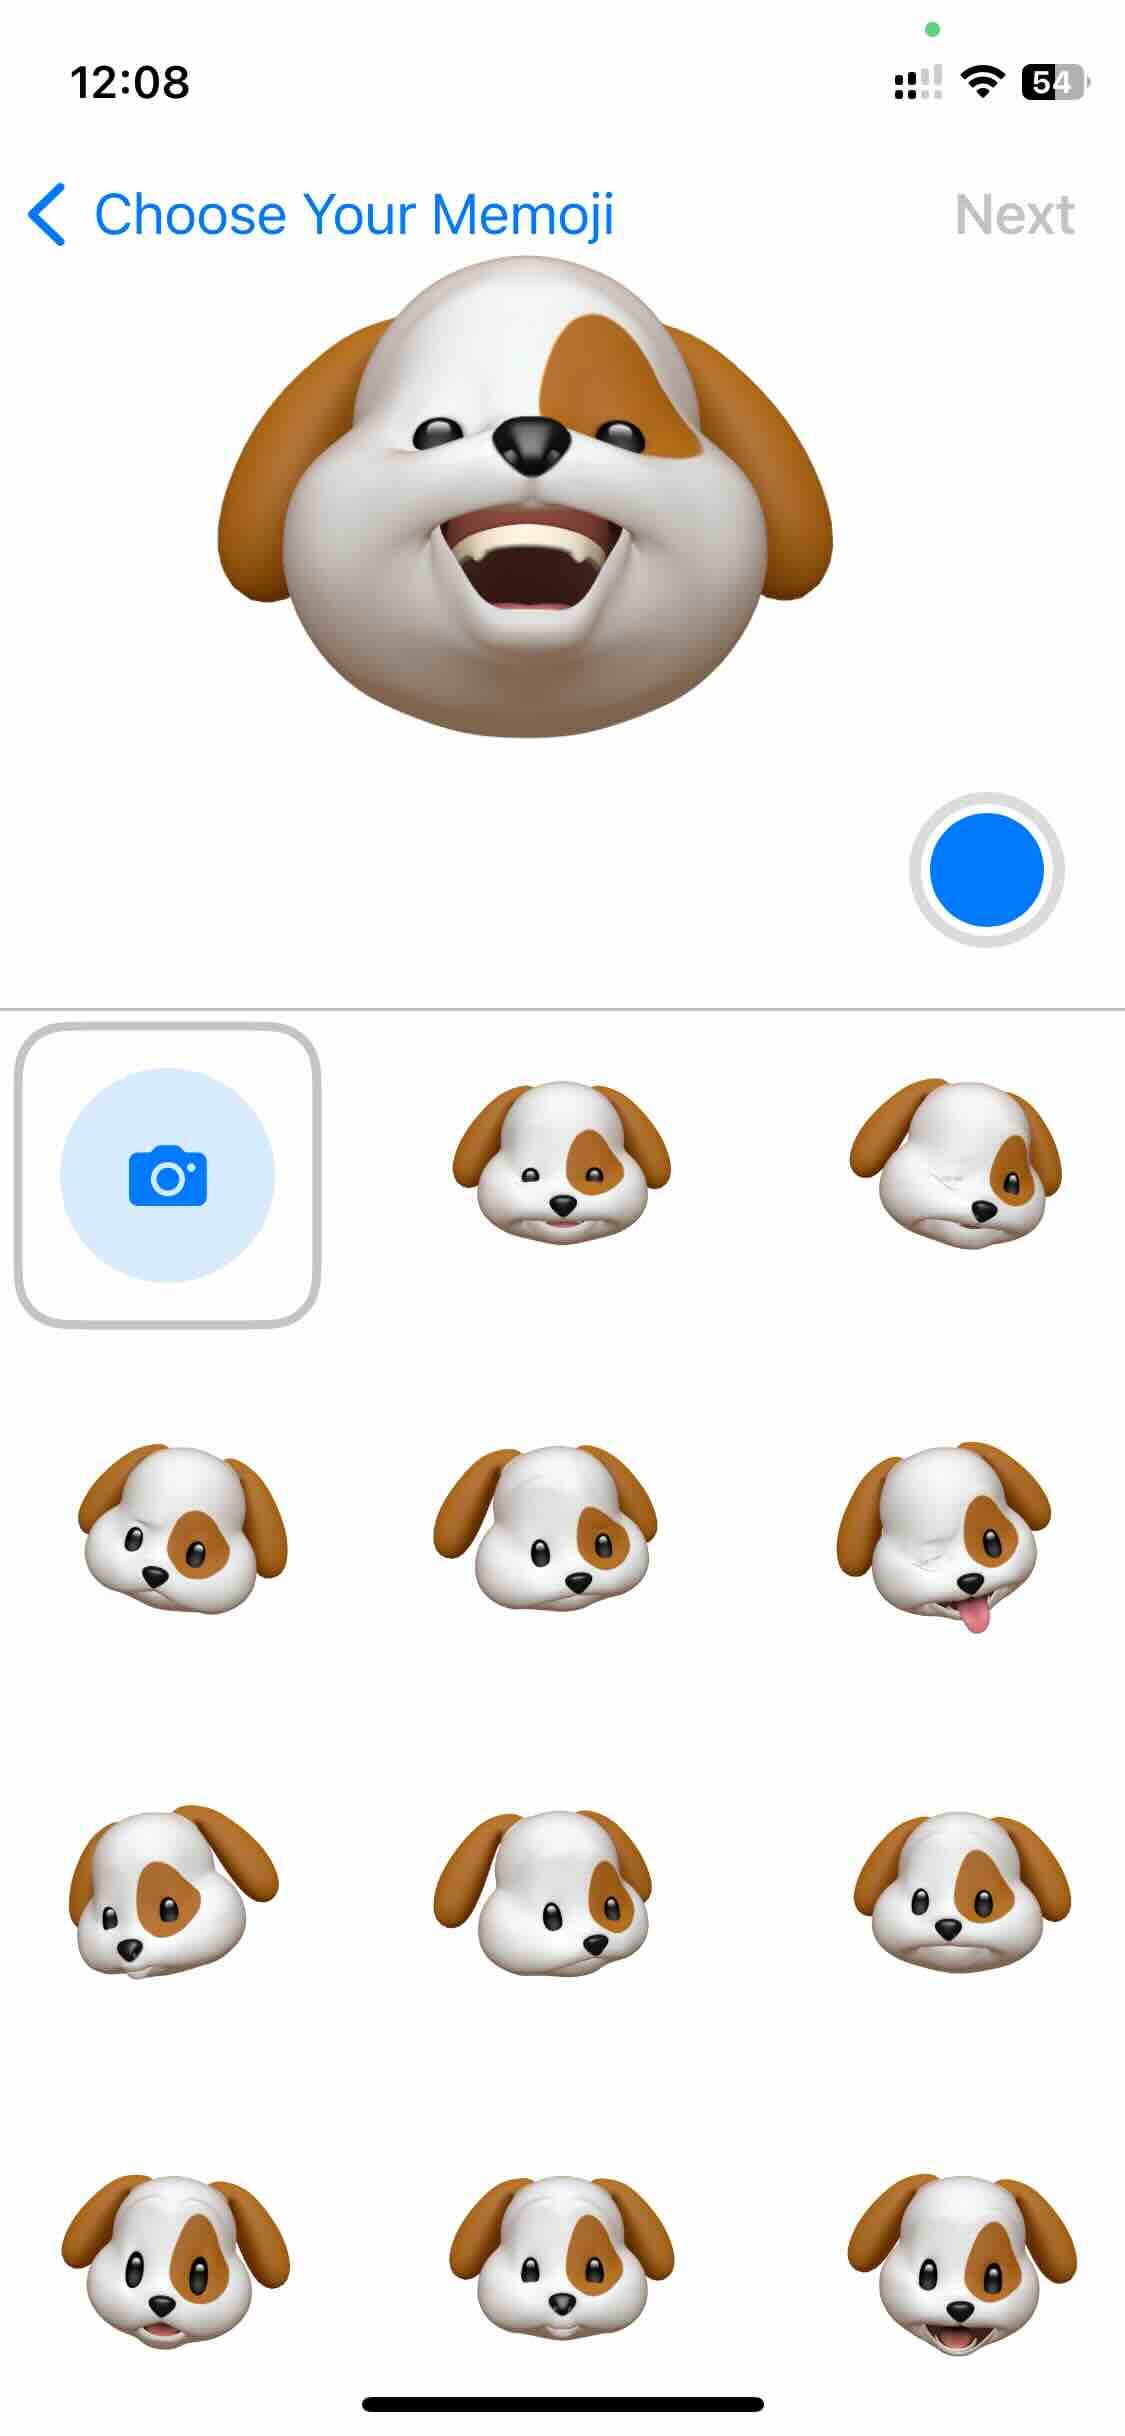 4 - Set a Memoji for Contact Posters